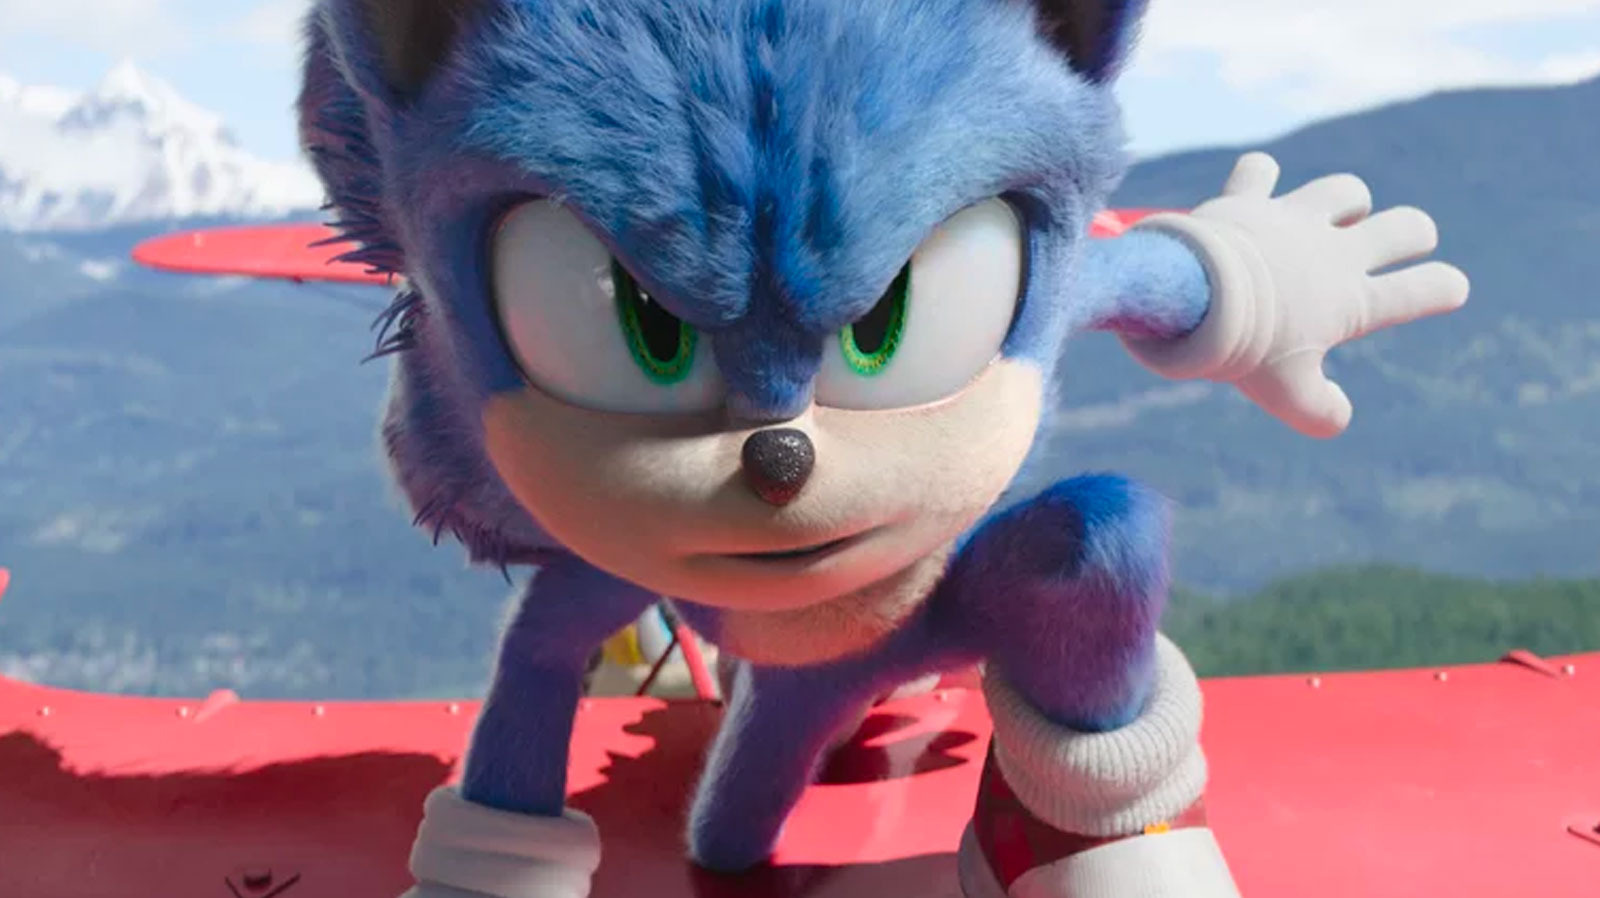 Upcoming Movies - Shadow has arrived in Sonic The Hedgehog 3